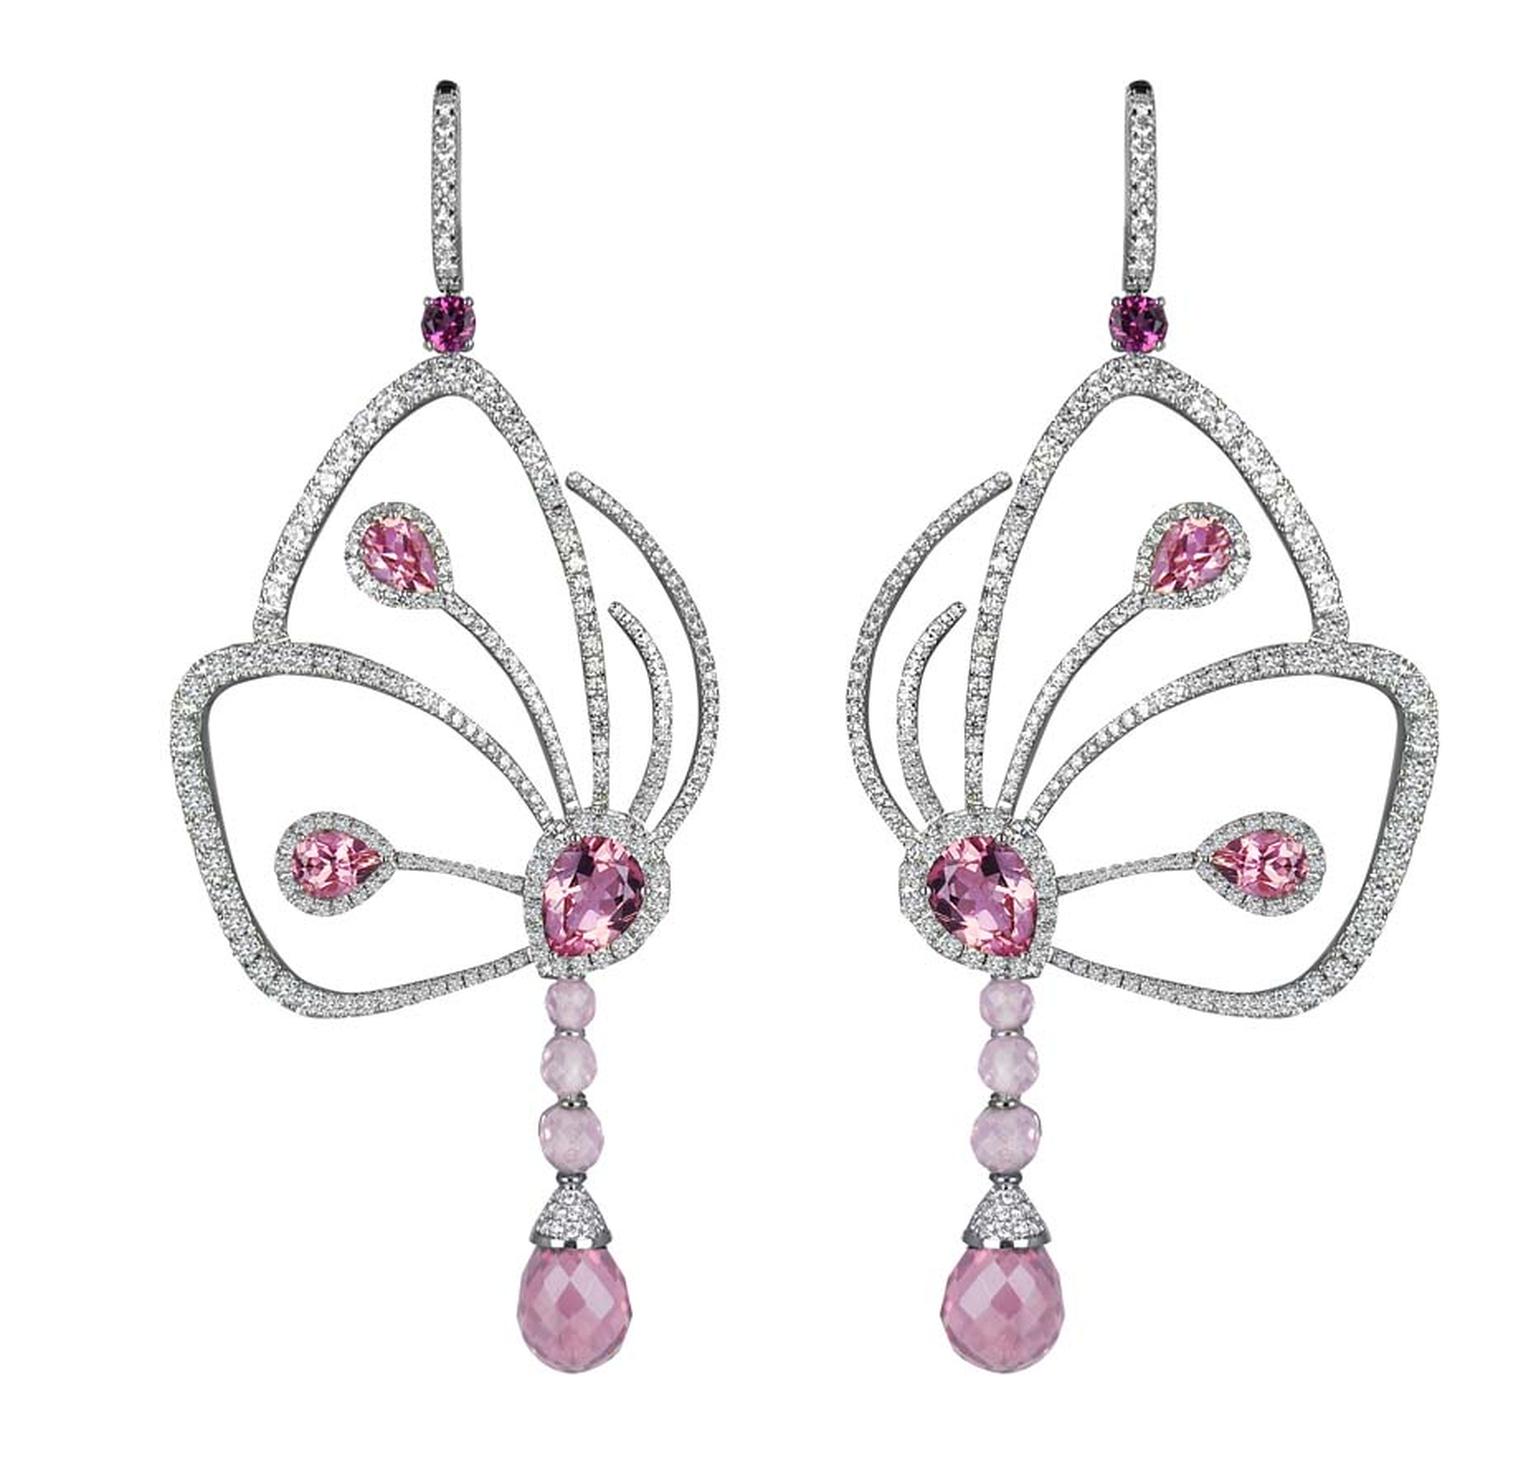 Jacob & Co. Butterfly earrings from the Papillon collection in white gold, set with pink tourmalines and diamonds.